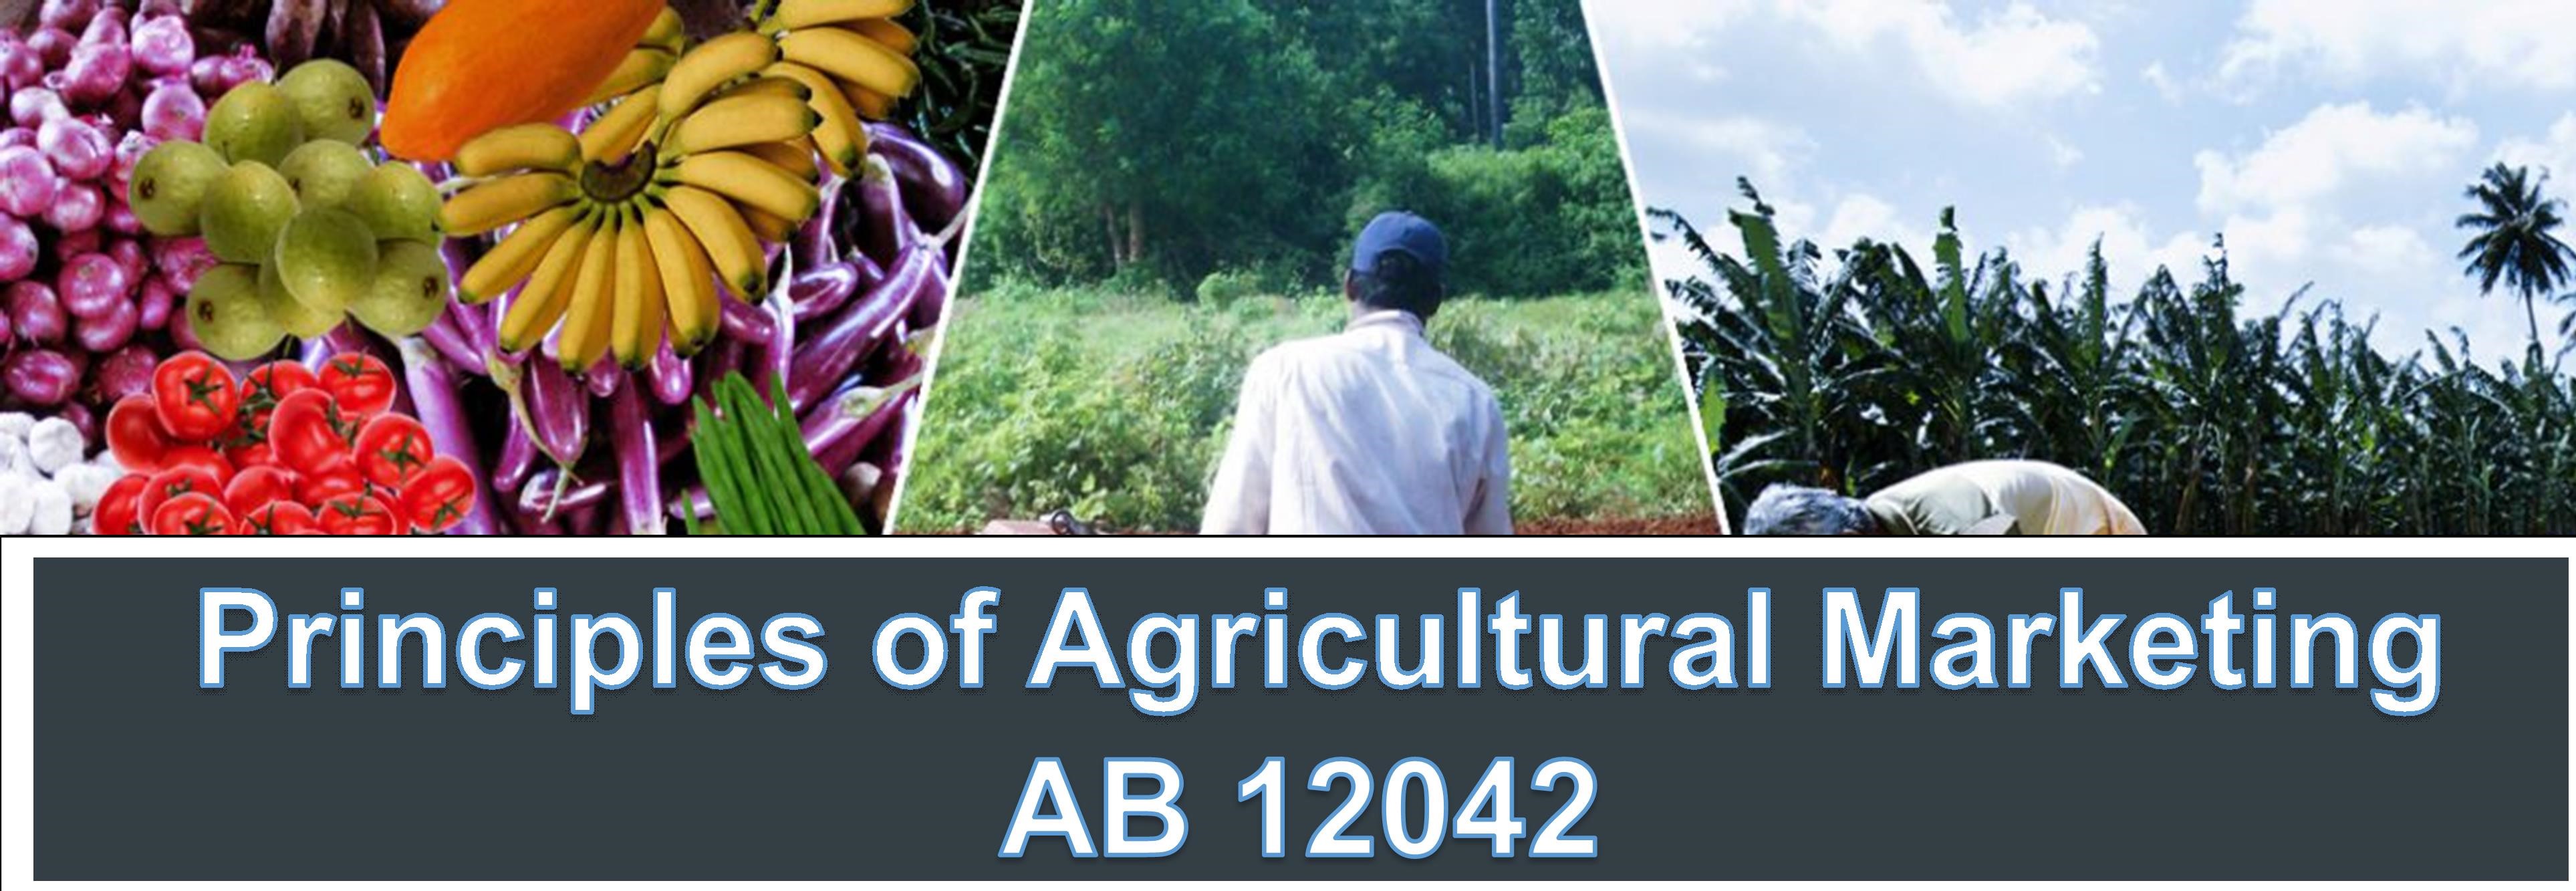 AB 12042 Principles of Agricultural Marketing - 2022/23